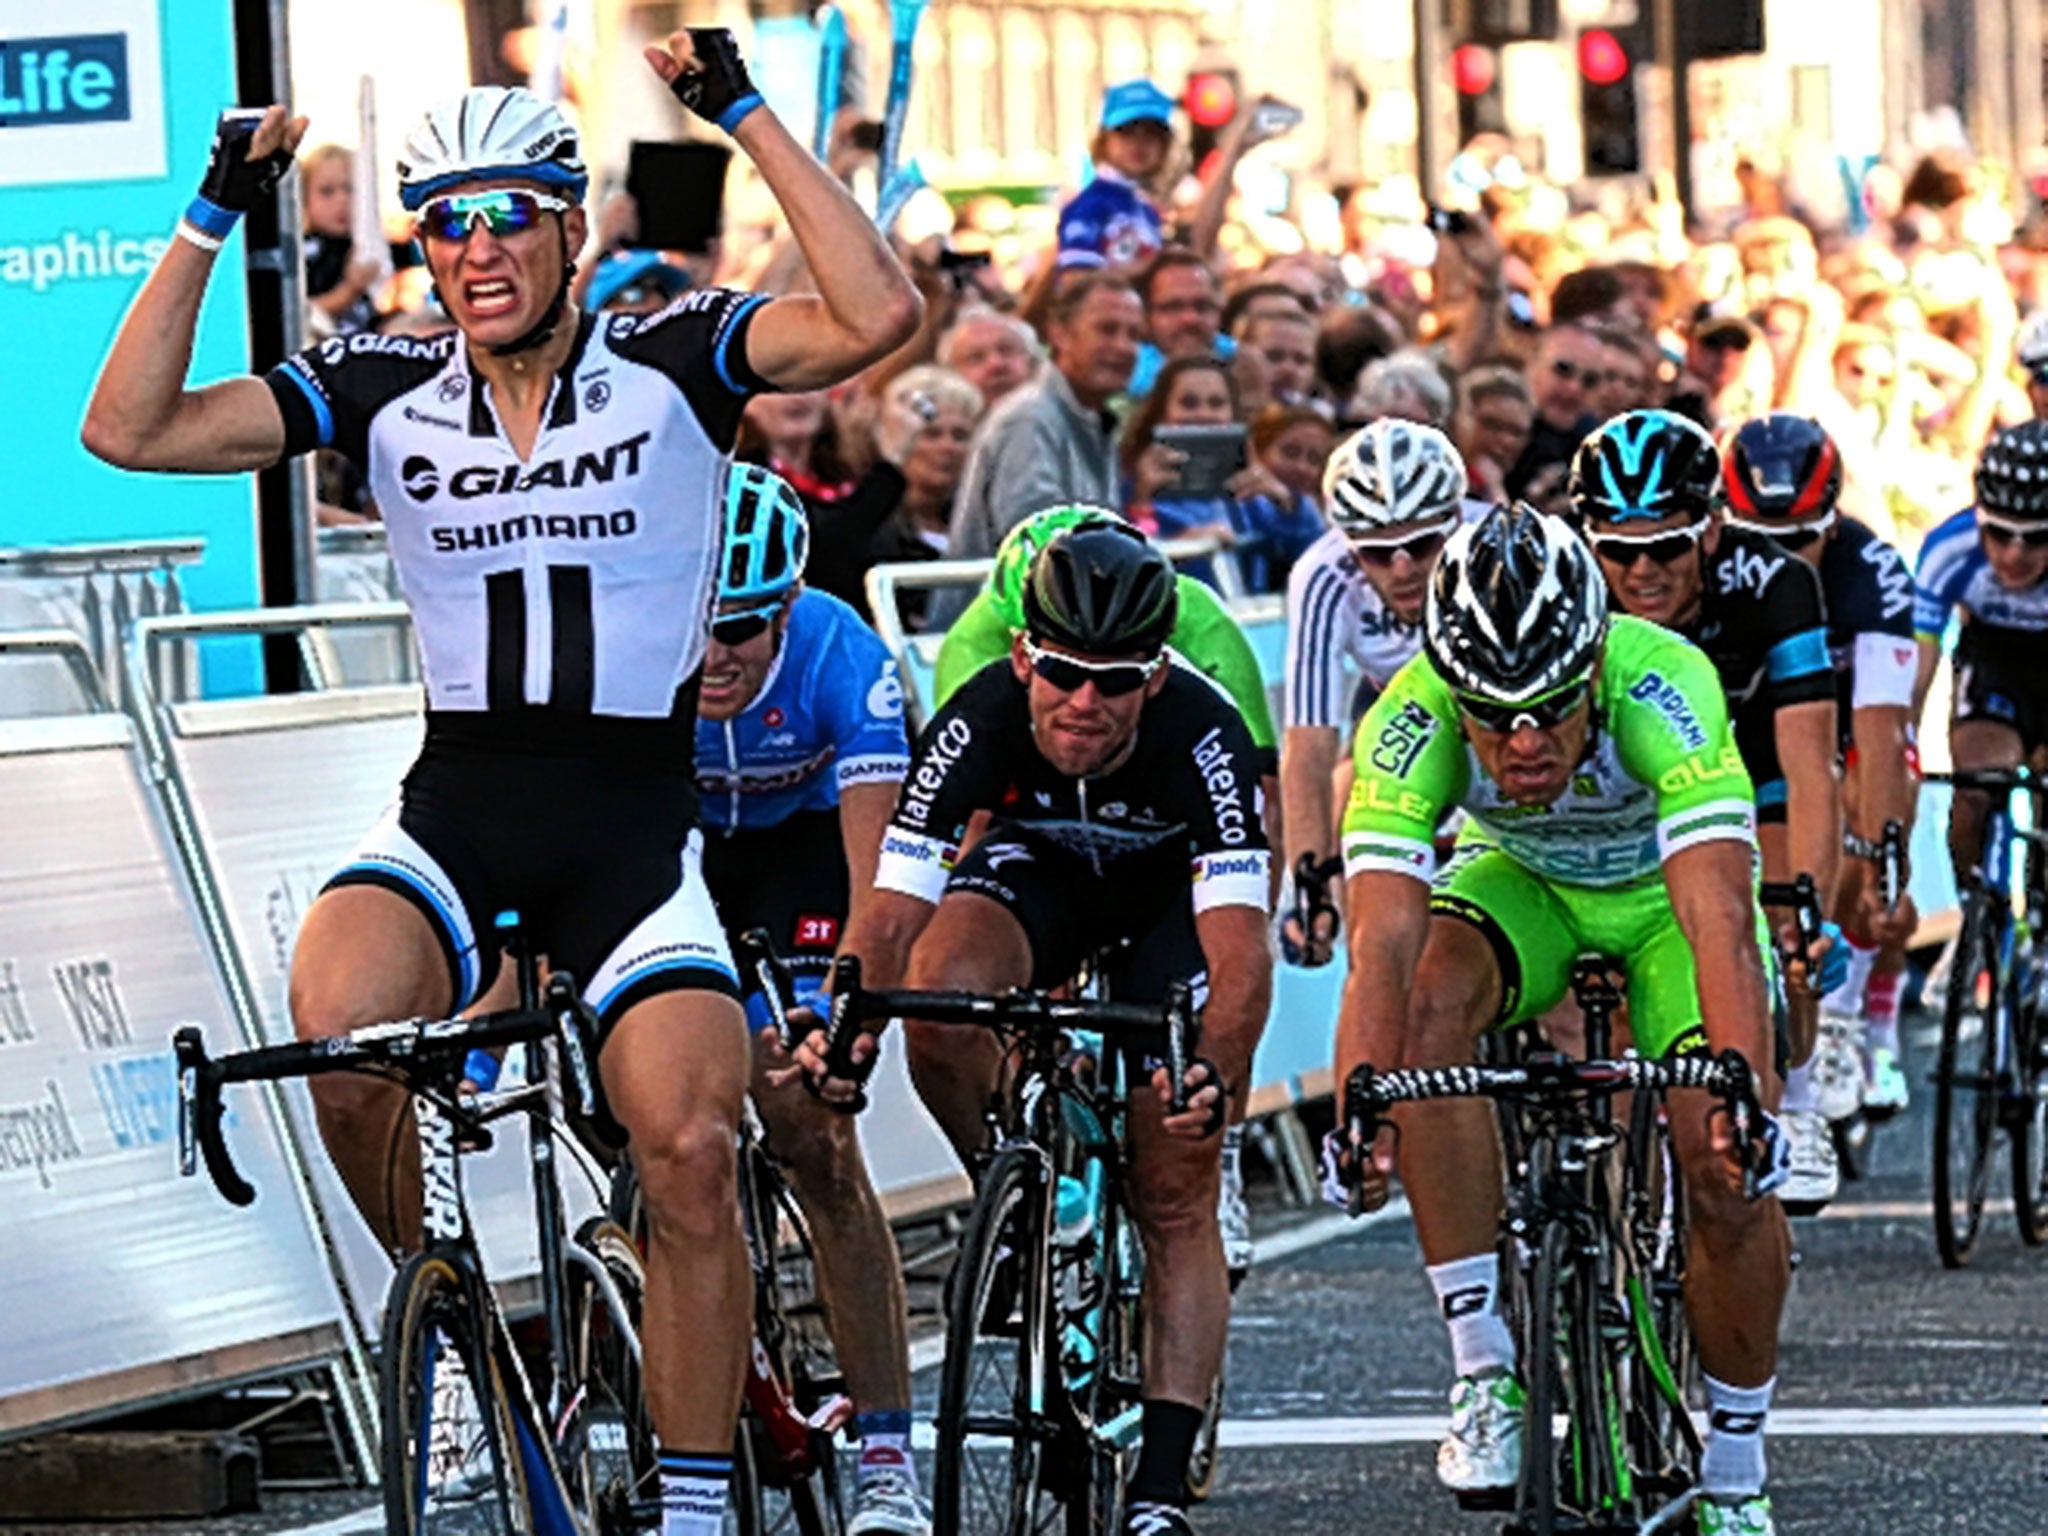 Marcel Kittel celebrates as he wins stage one of the Tour of Britain in Liverpool ahead of Nicola Ruffoni (right) and Mark Cavendish in third (centre)